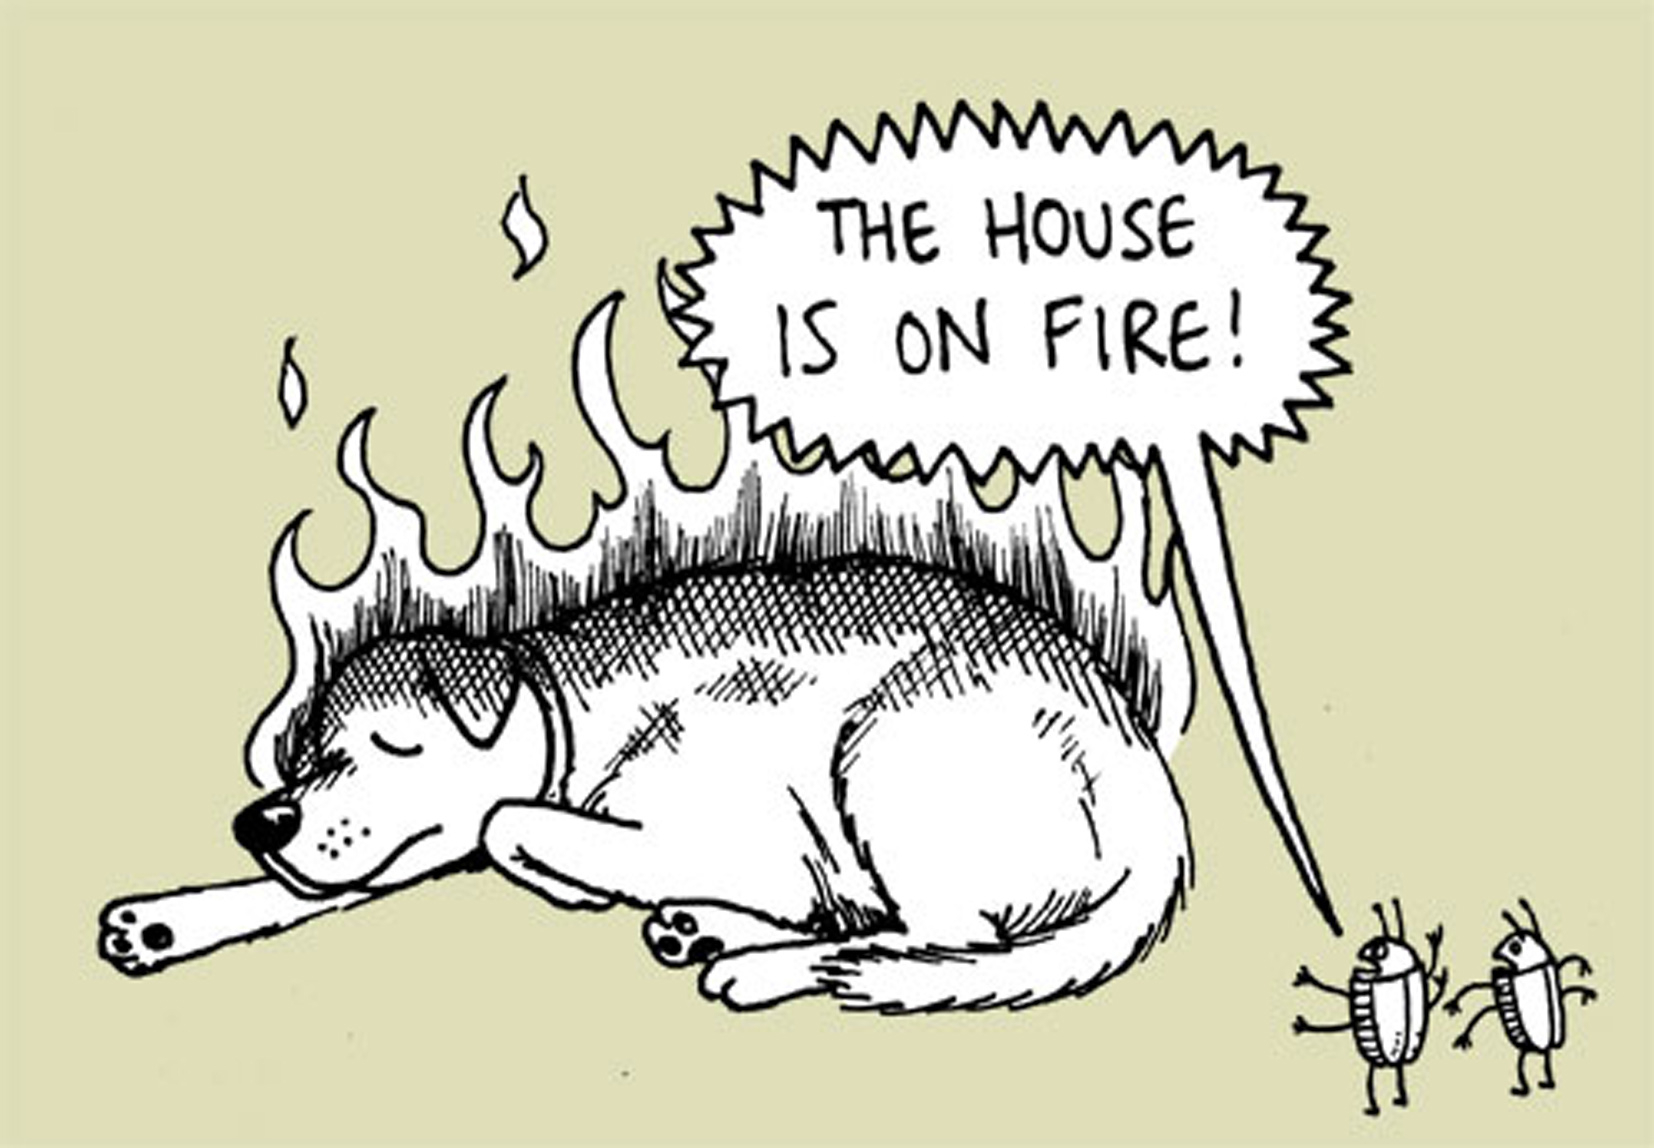 The House Is On Fire!